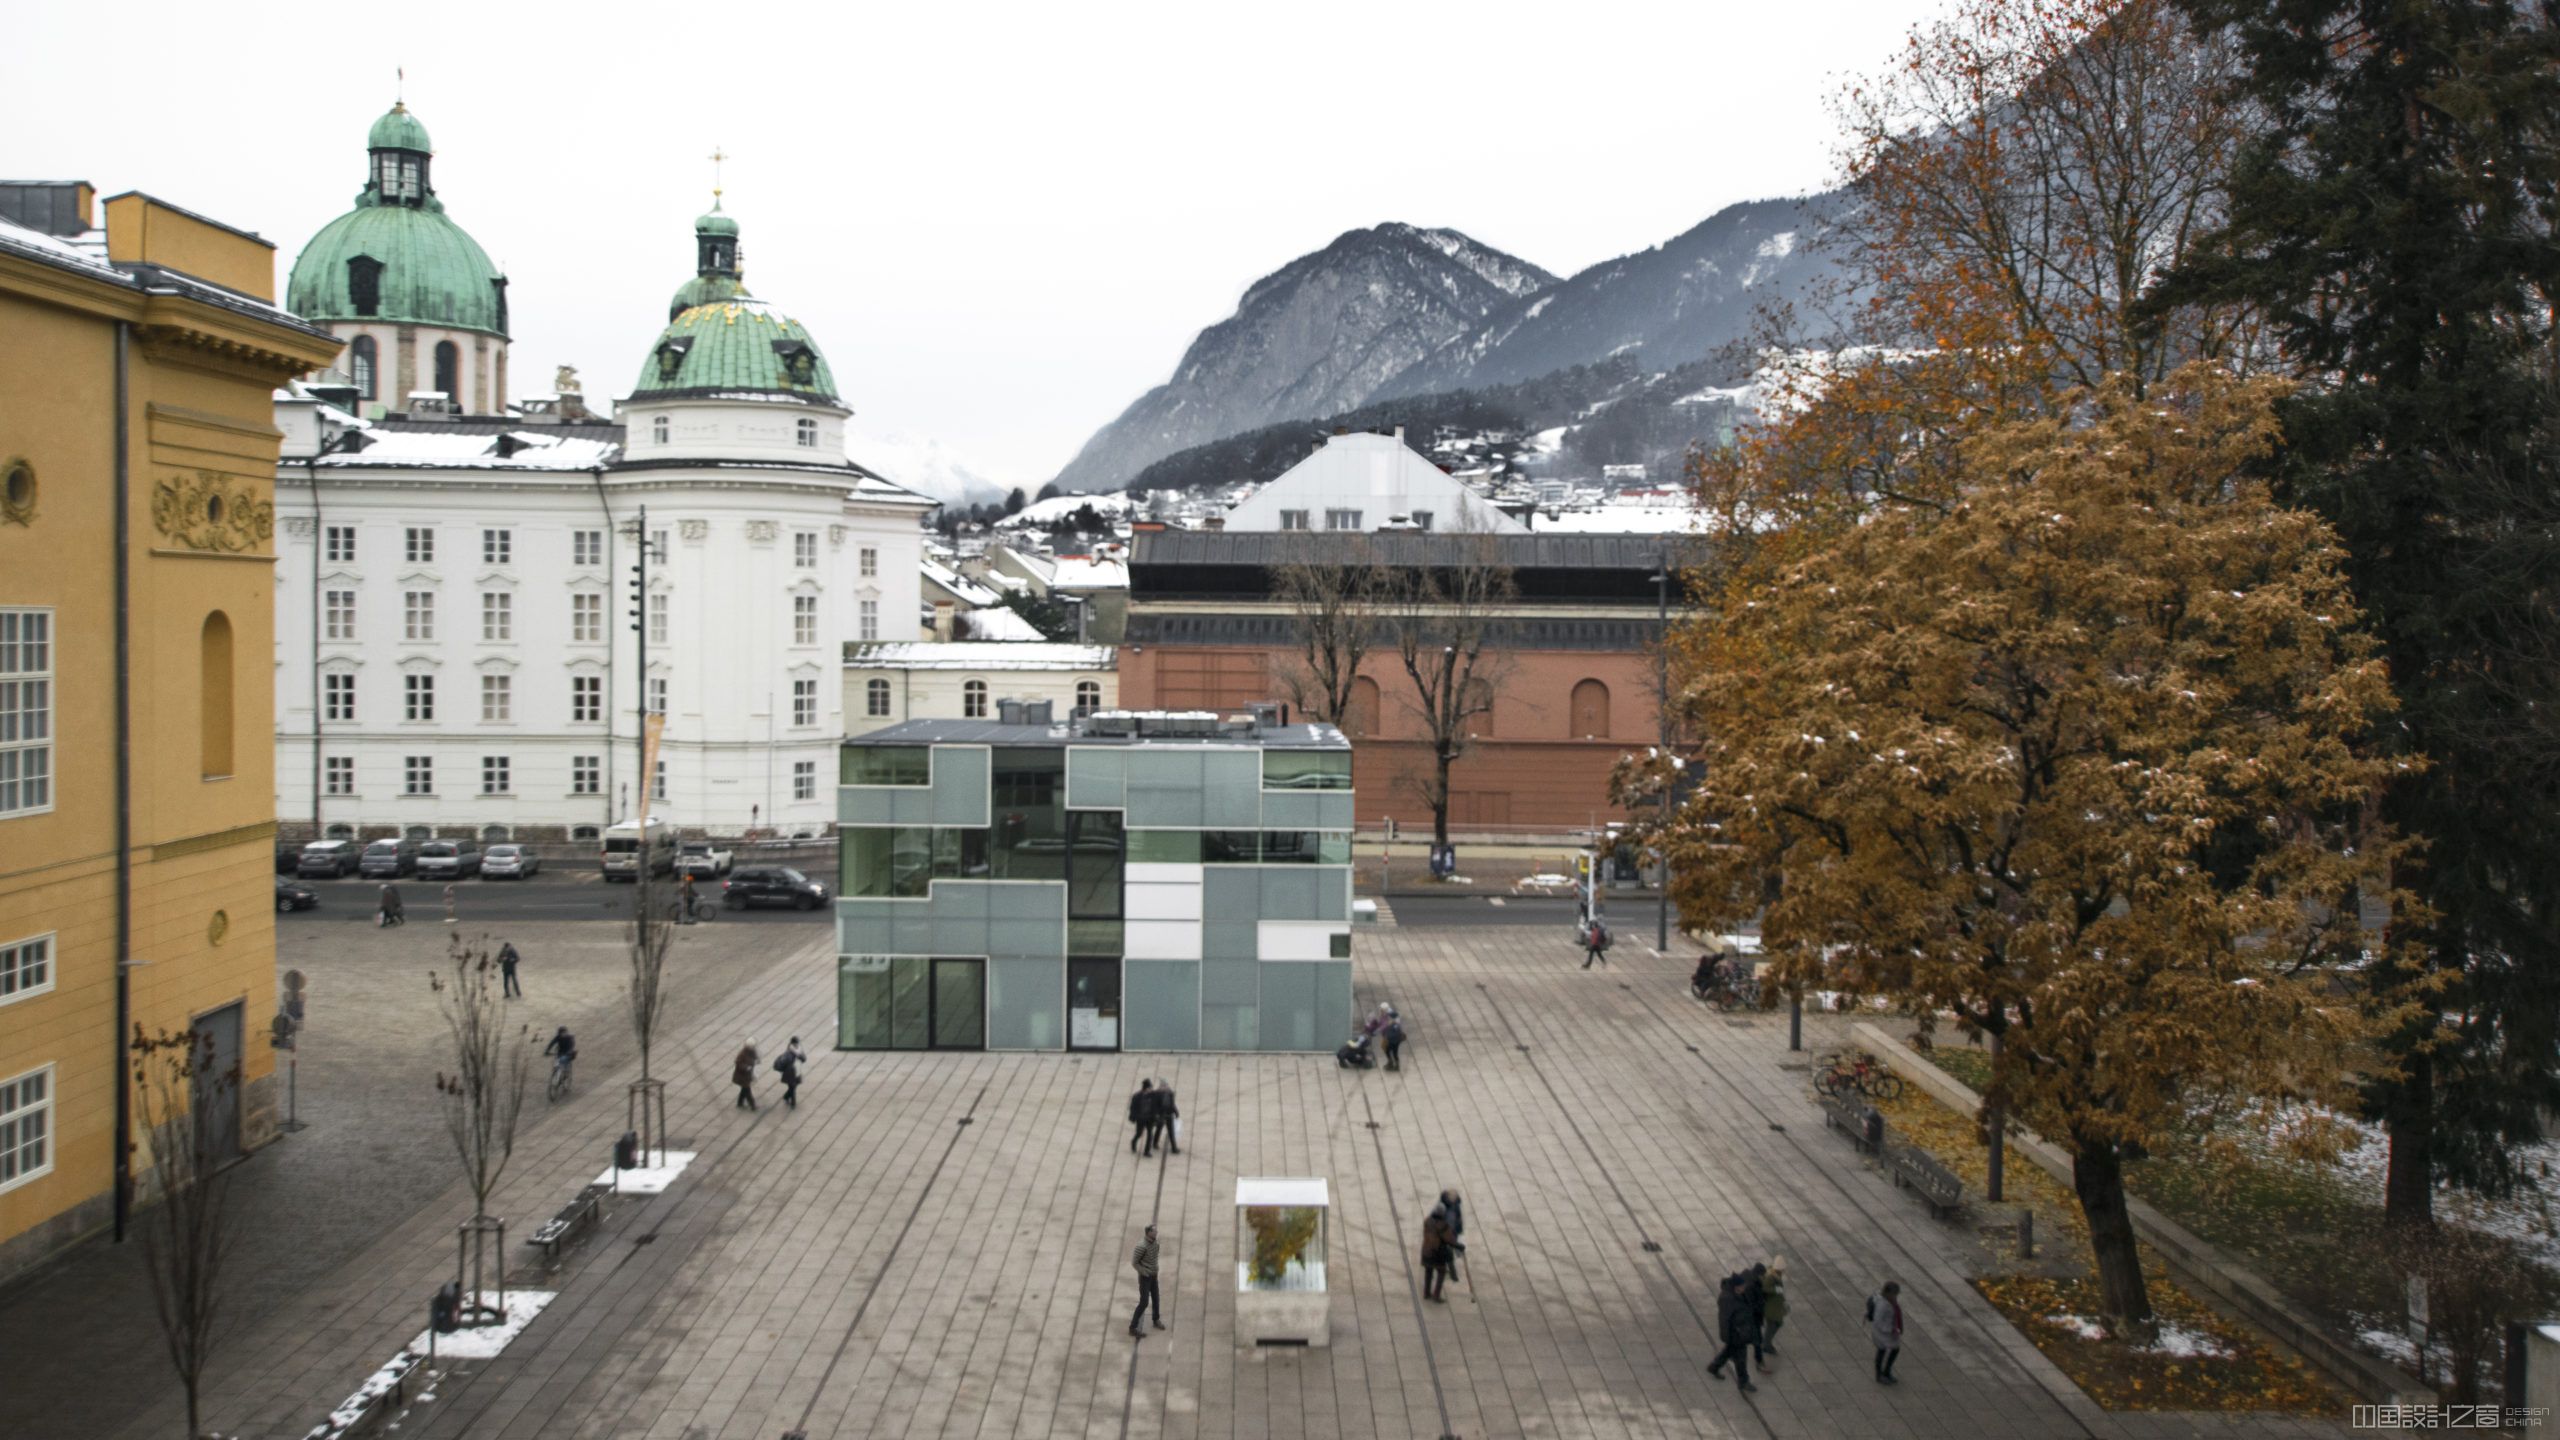 A photograph of an Austrian public square with mountains in the background and a public sculpture by Thomas Medicus in the foreground.